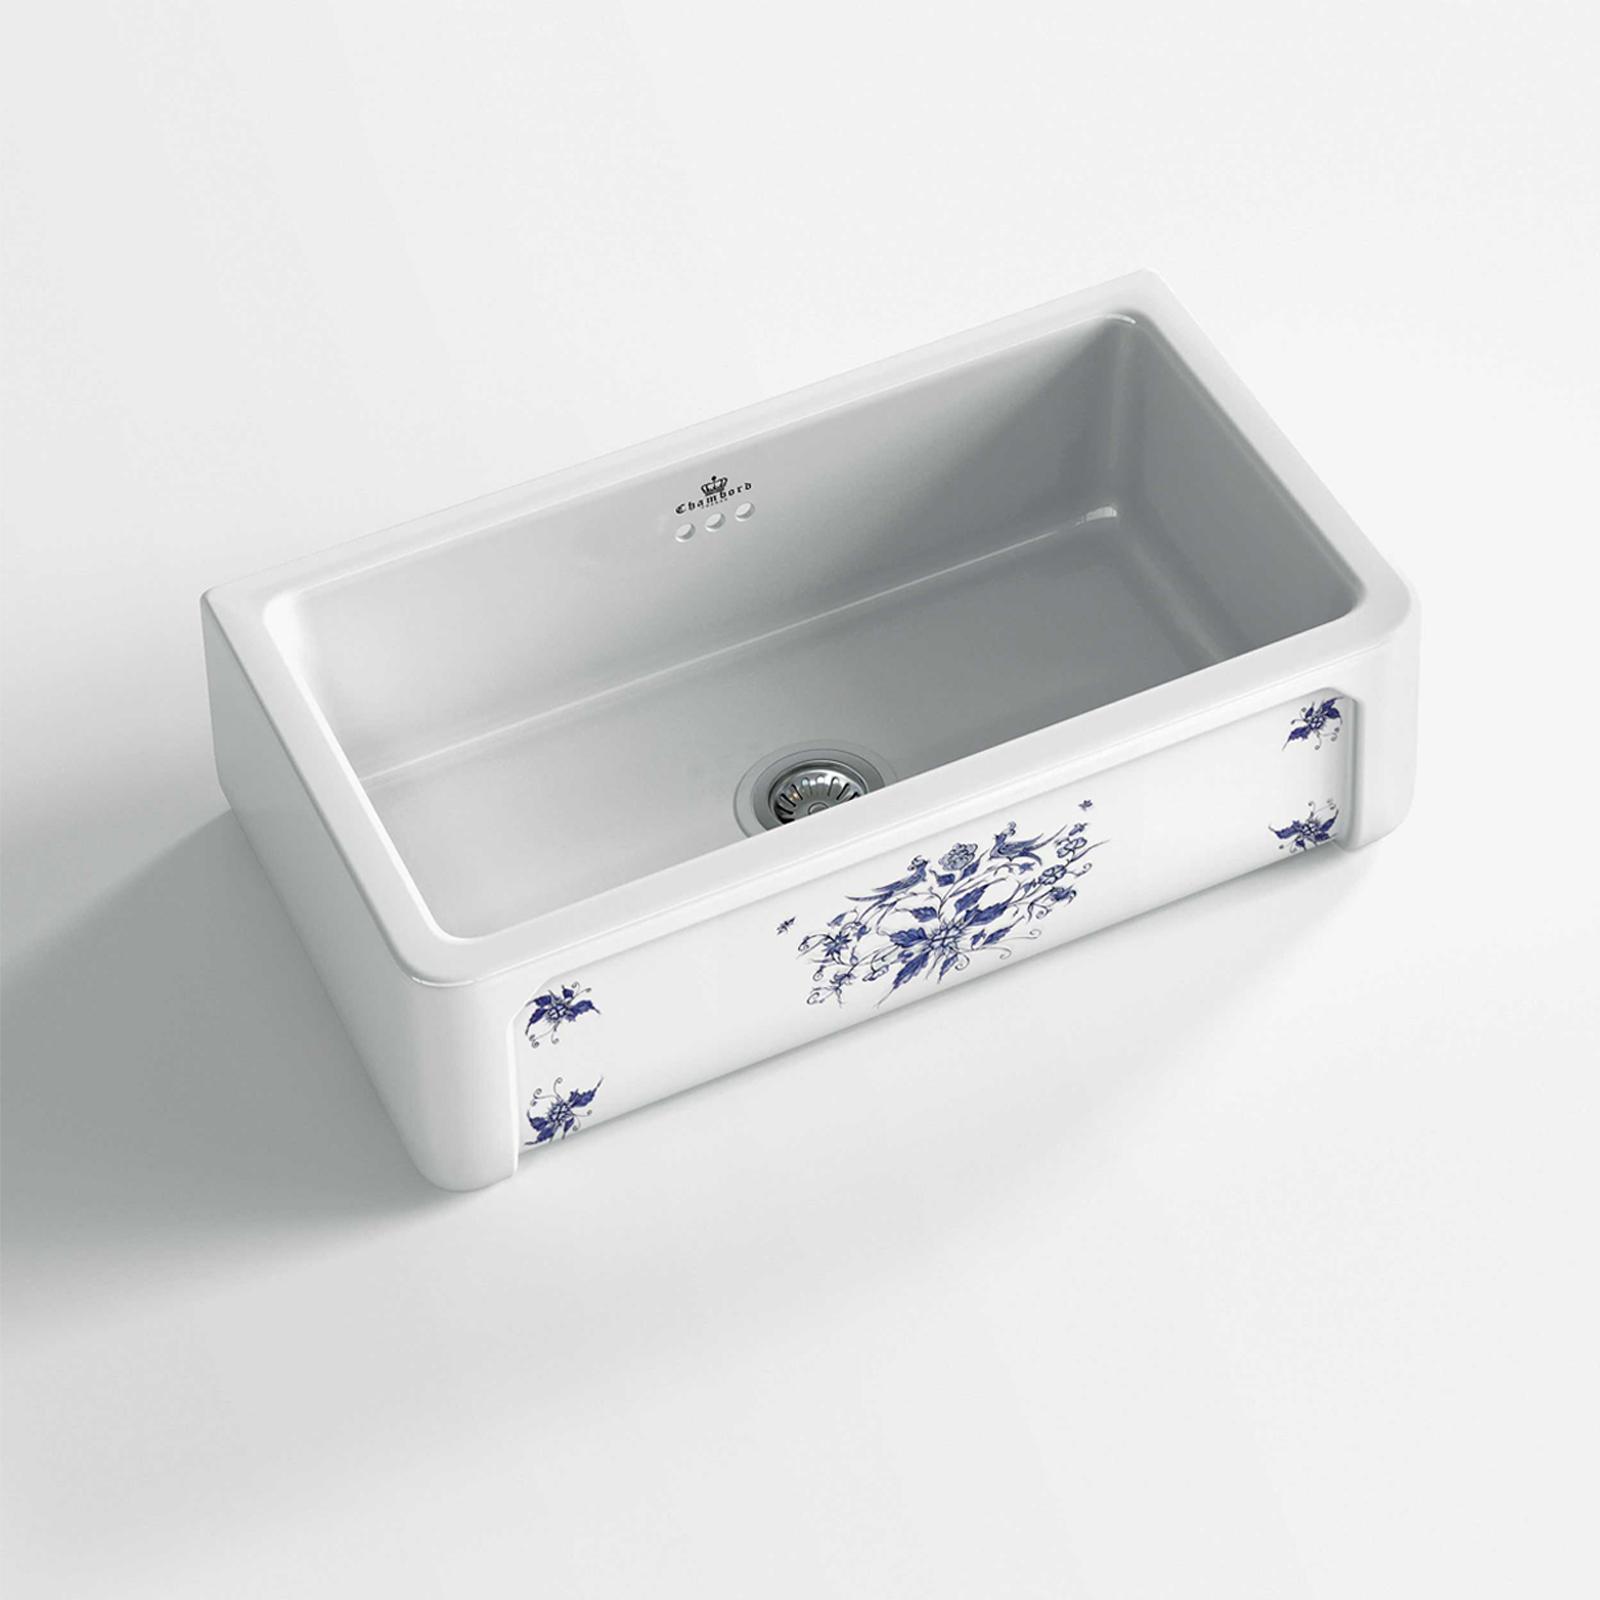 High-quality sink Henri II Moustiers - single bowl, decorated ceramic